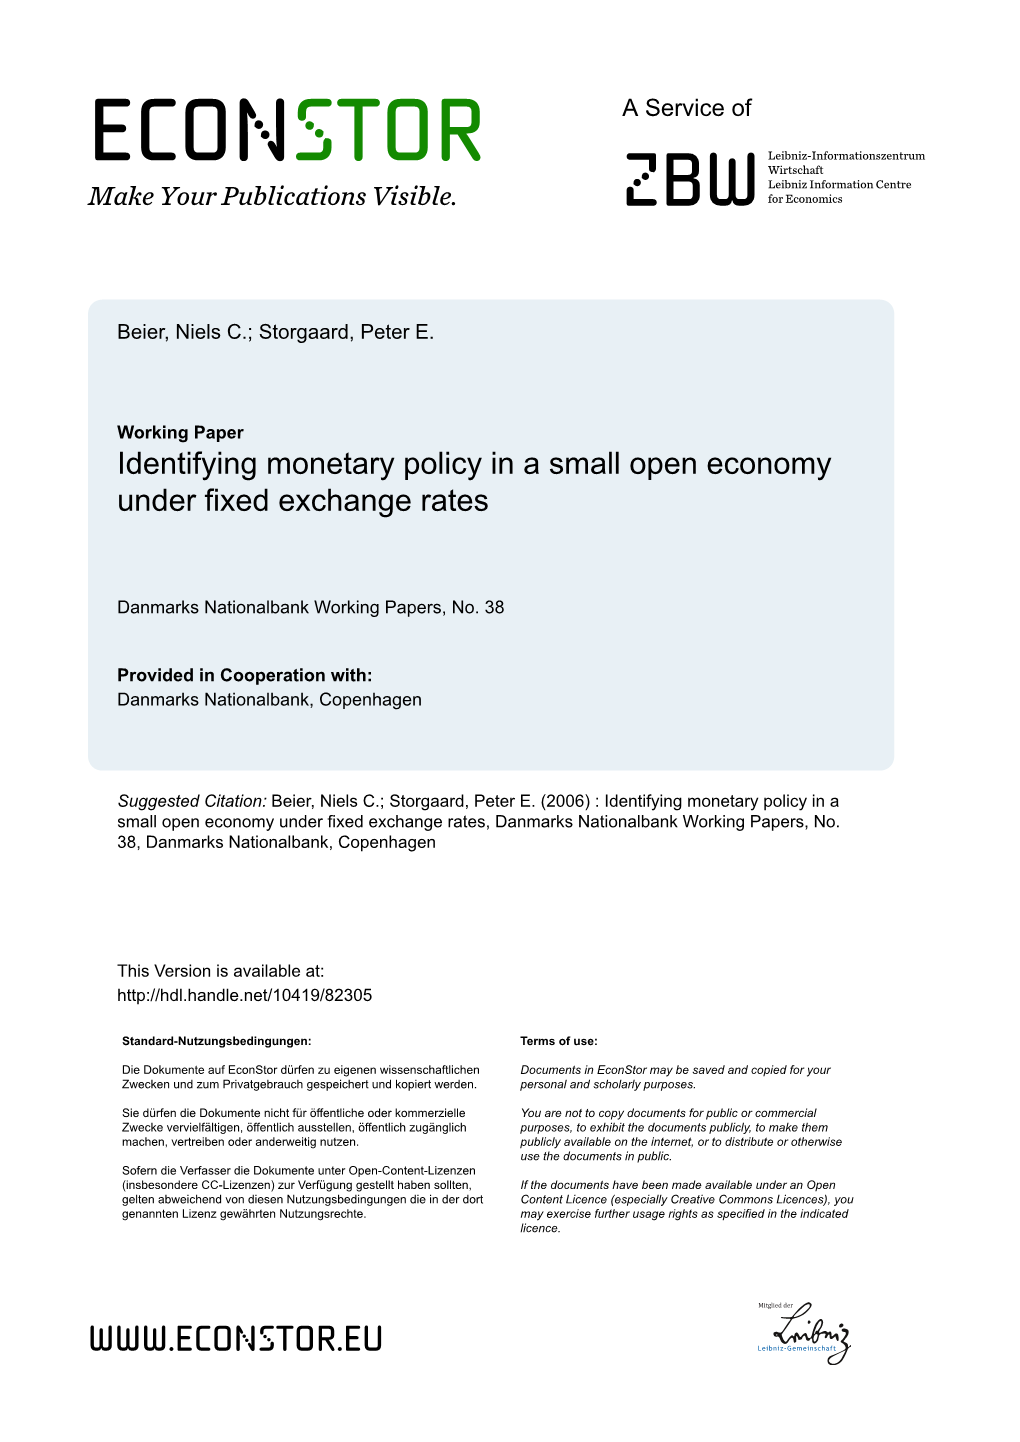 Identifying Monetary Policy in a Small Open Economy Under Fixed Exchange Rates